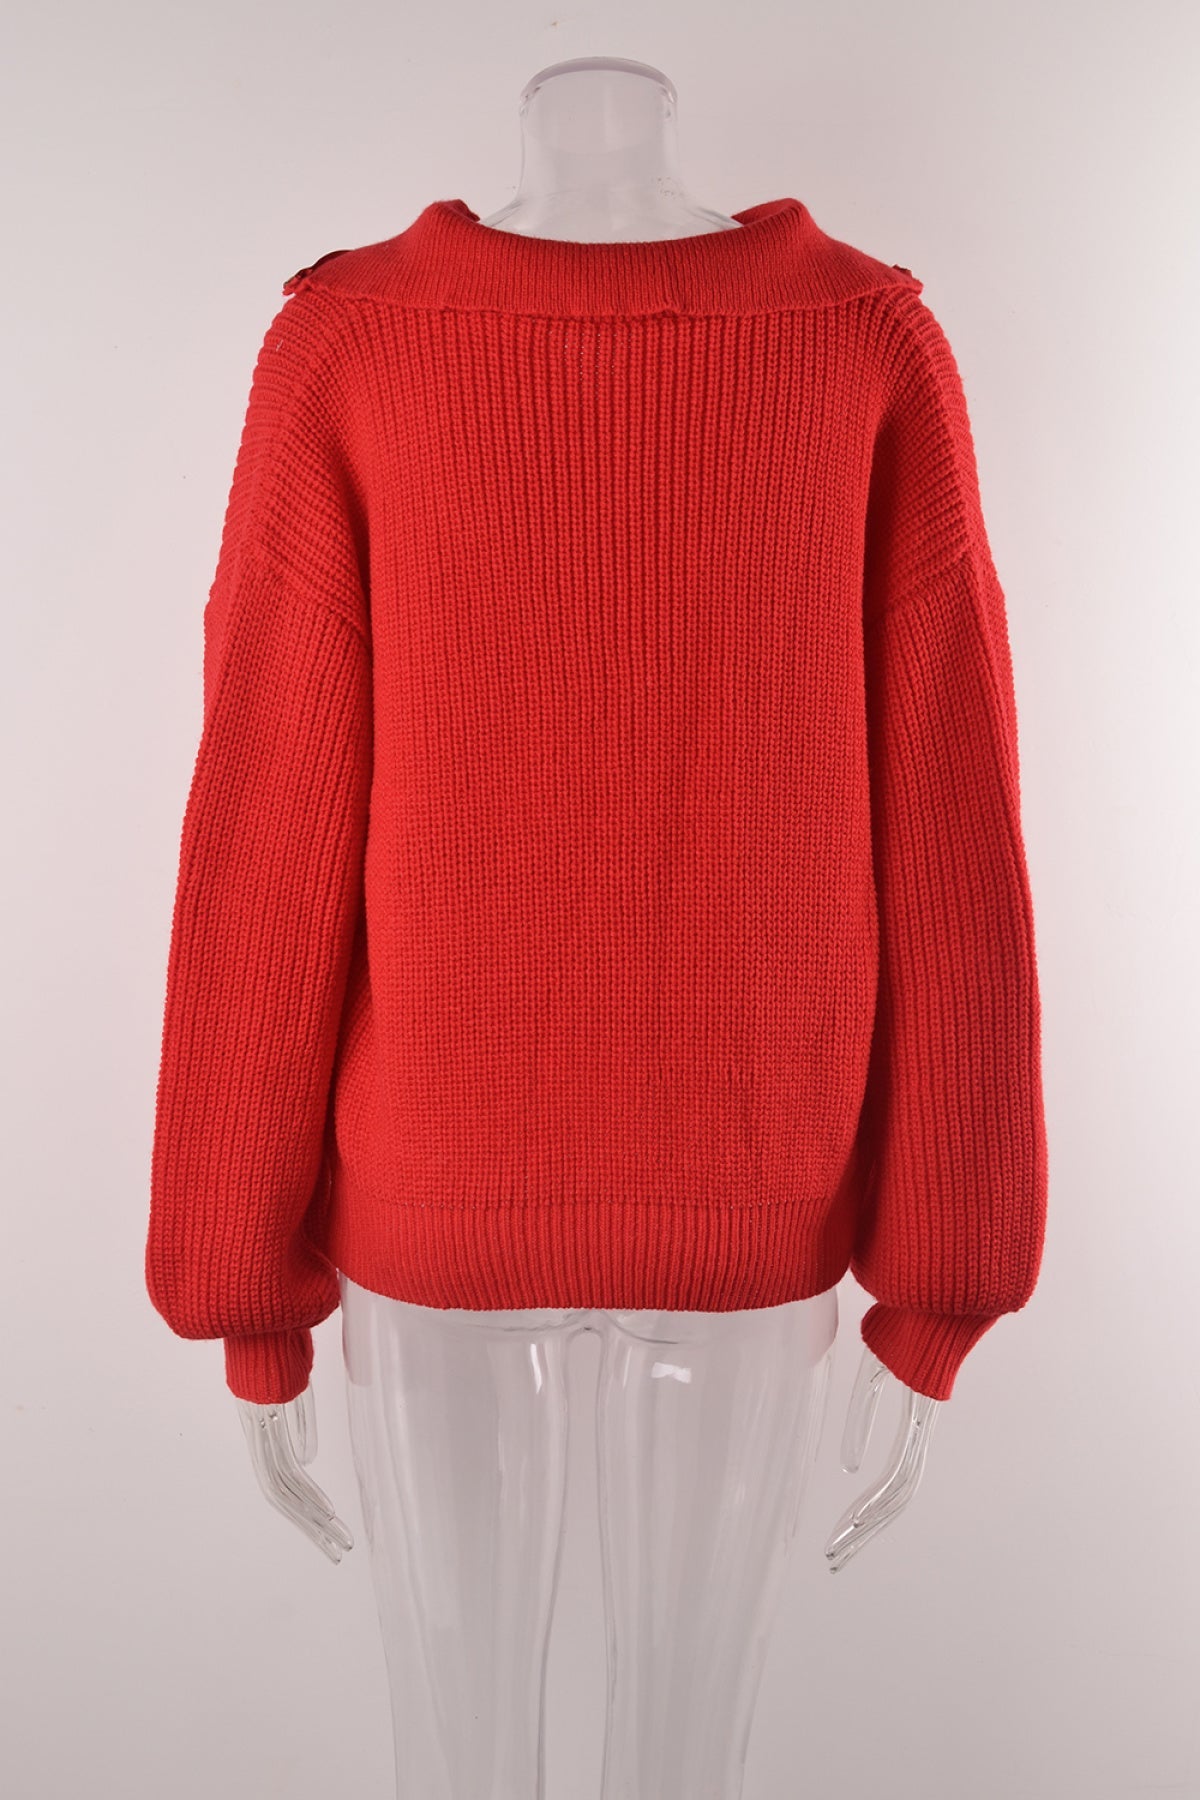 Pullover Zipper Knitted Collared Balloon Sleeve Sweater